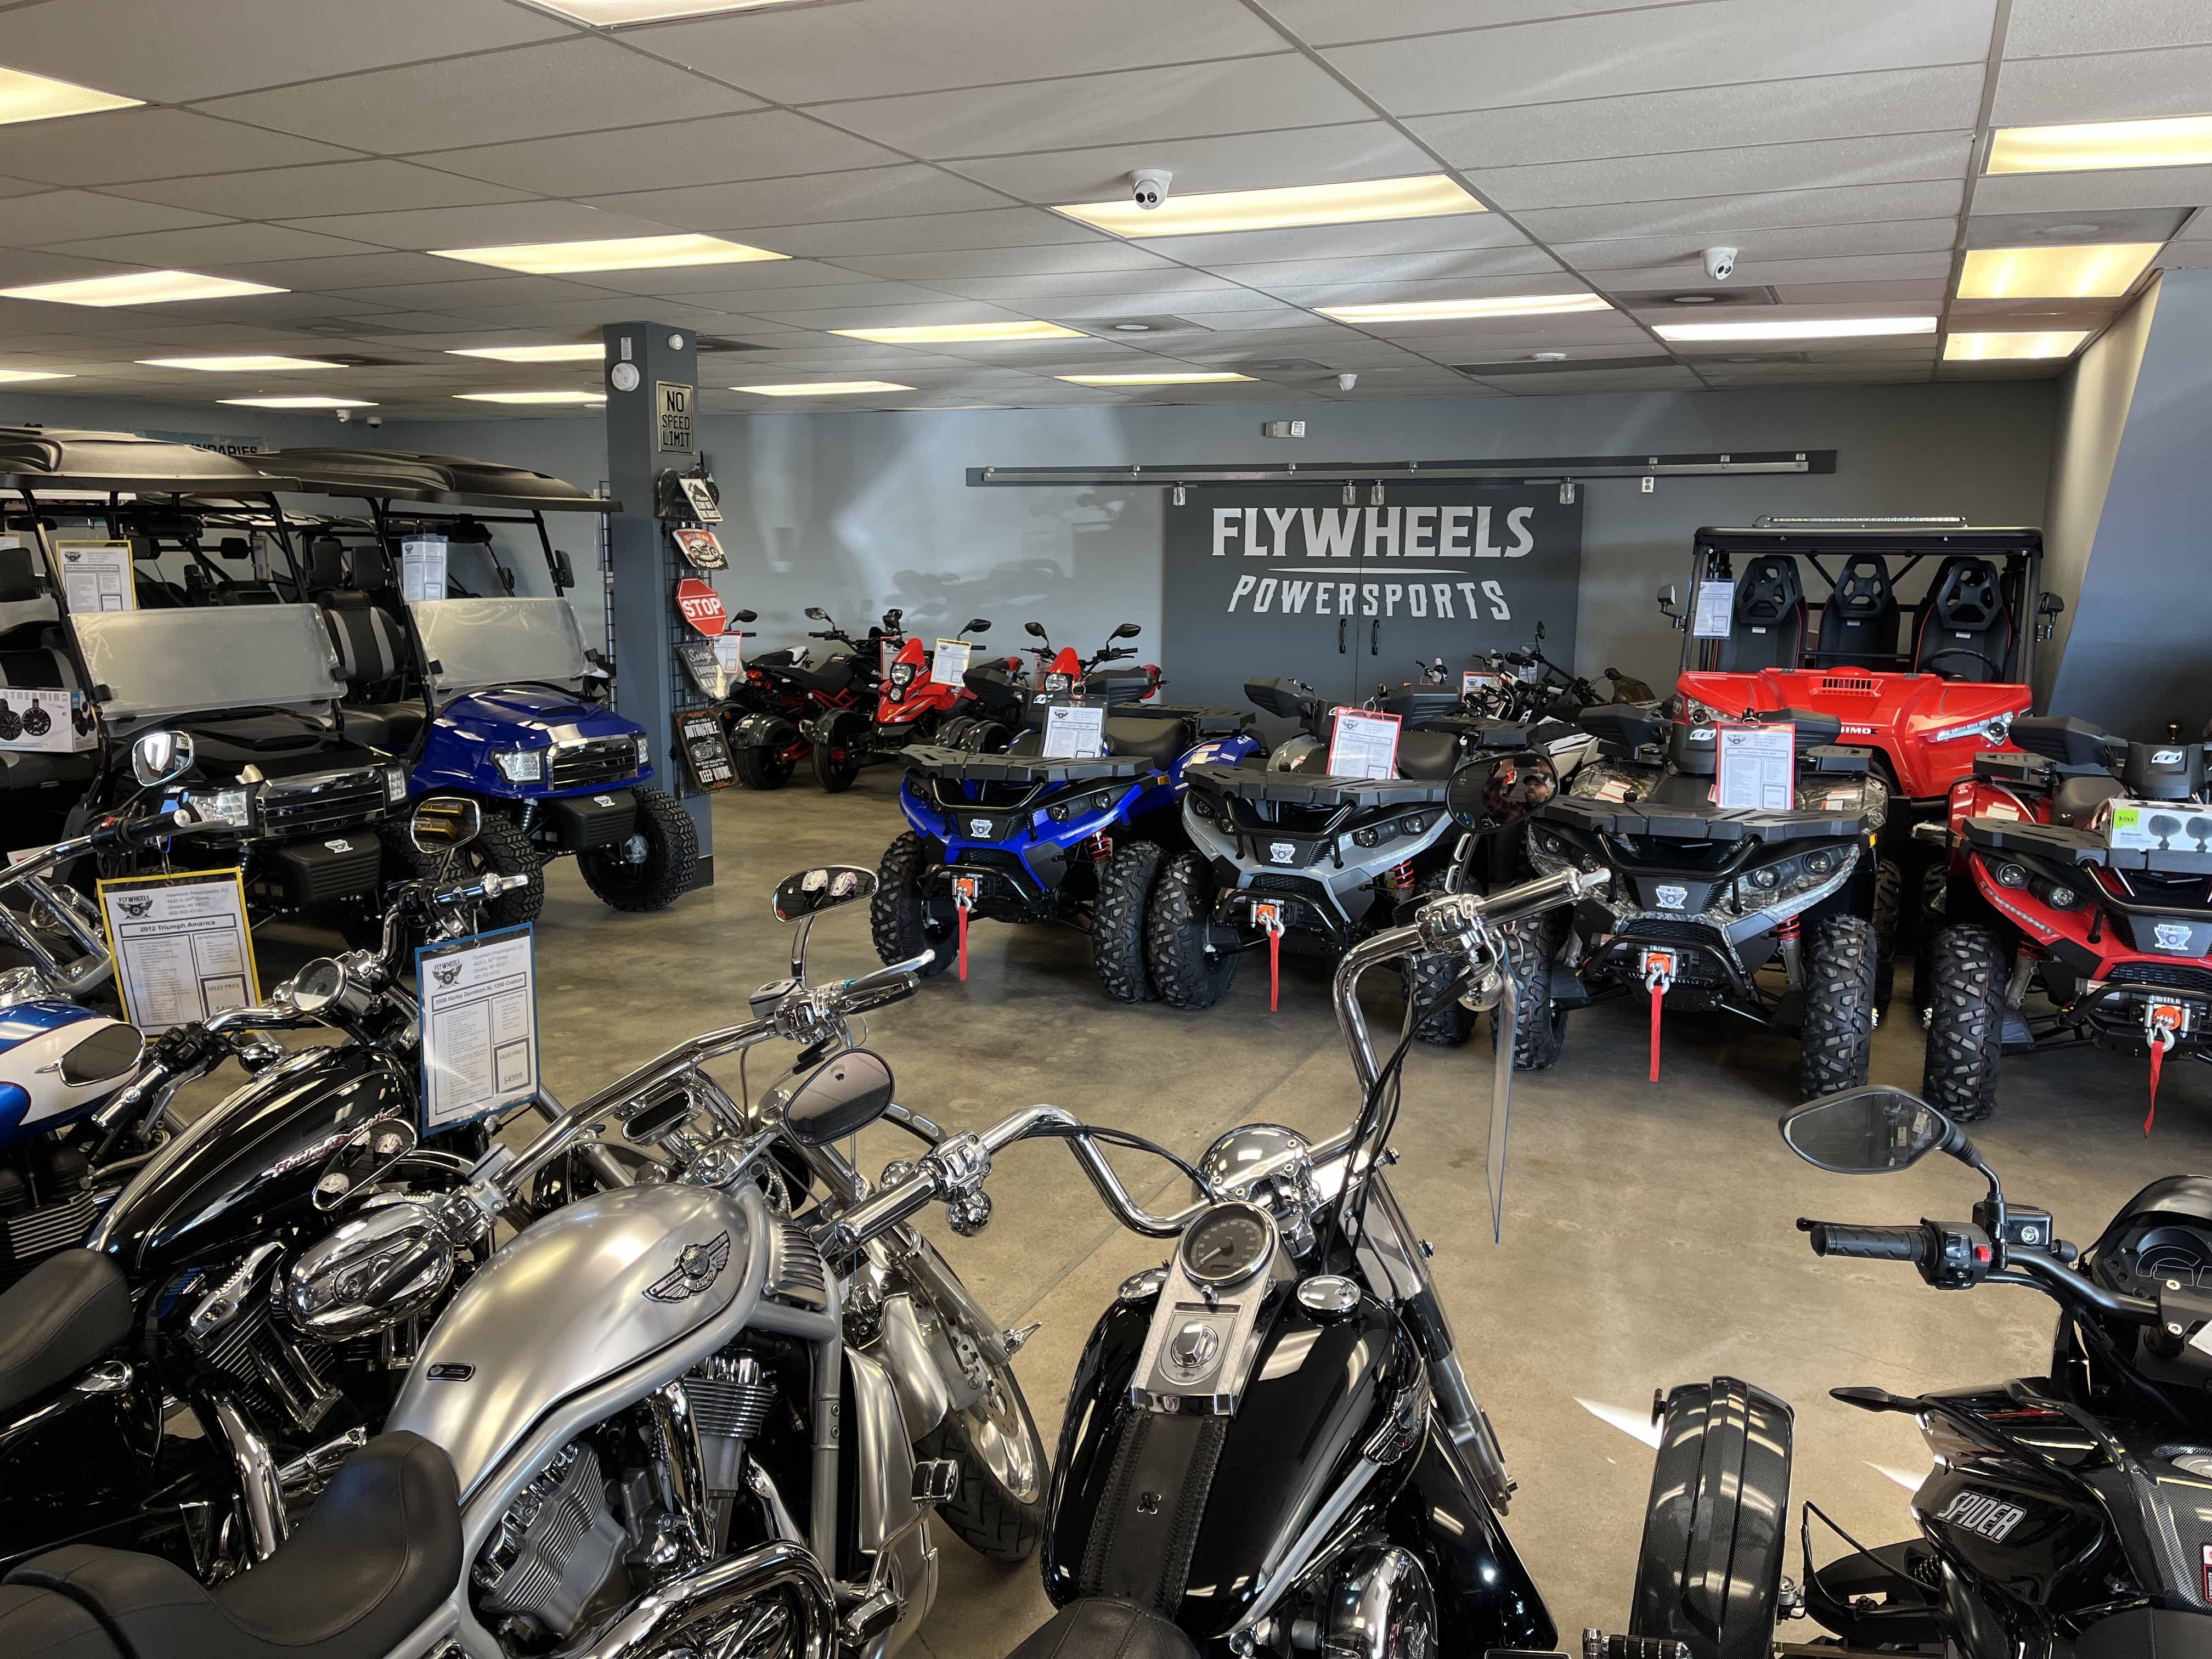 Showroom that includes ATVs, Utility task vehicles, and motorcycles